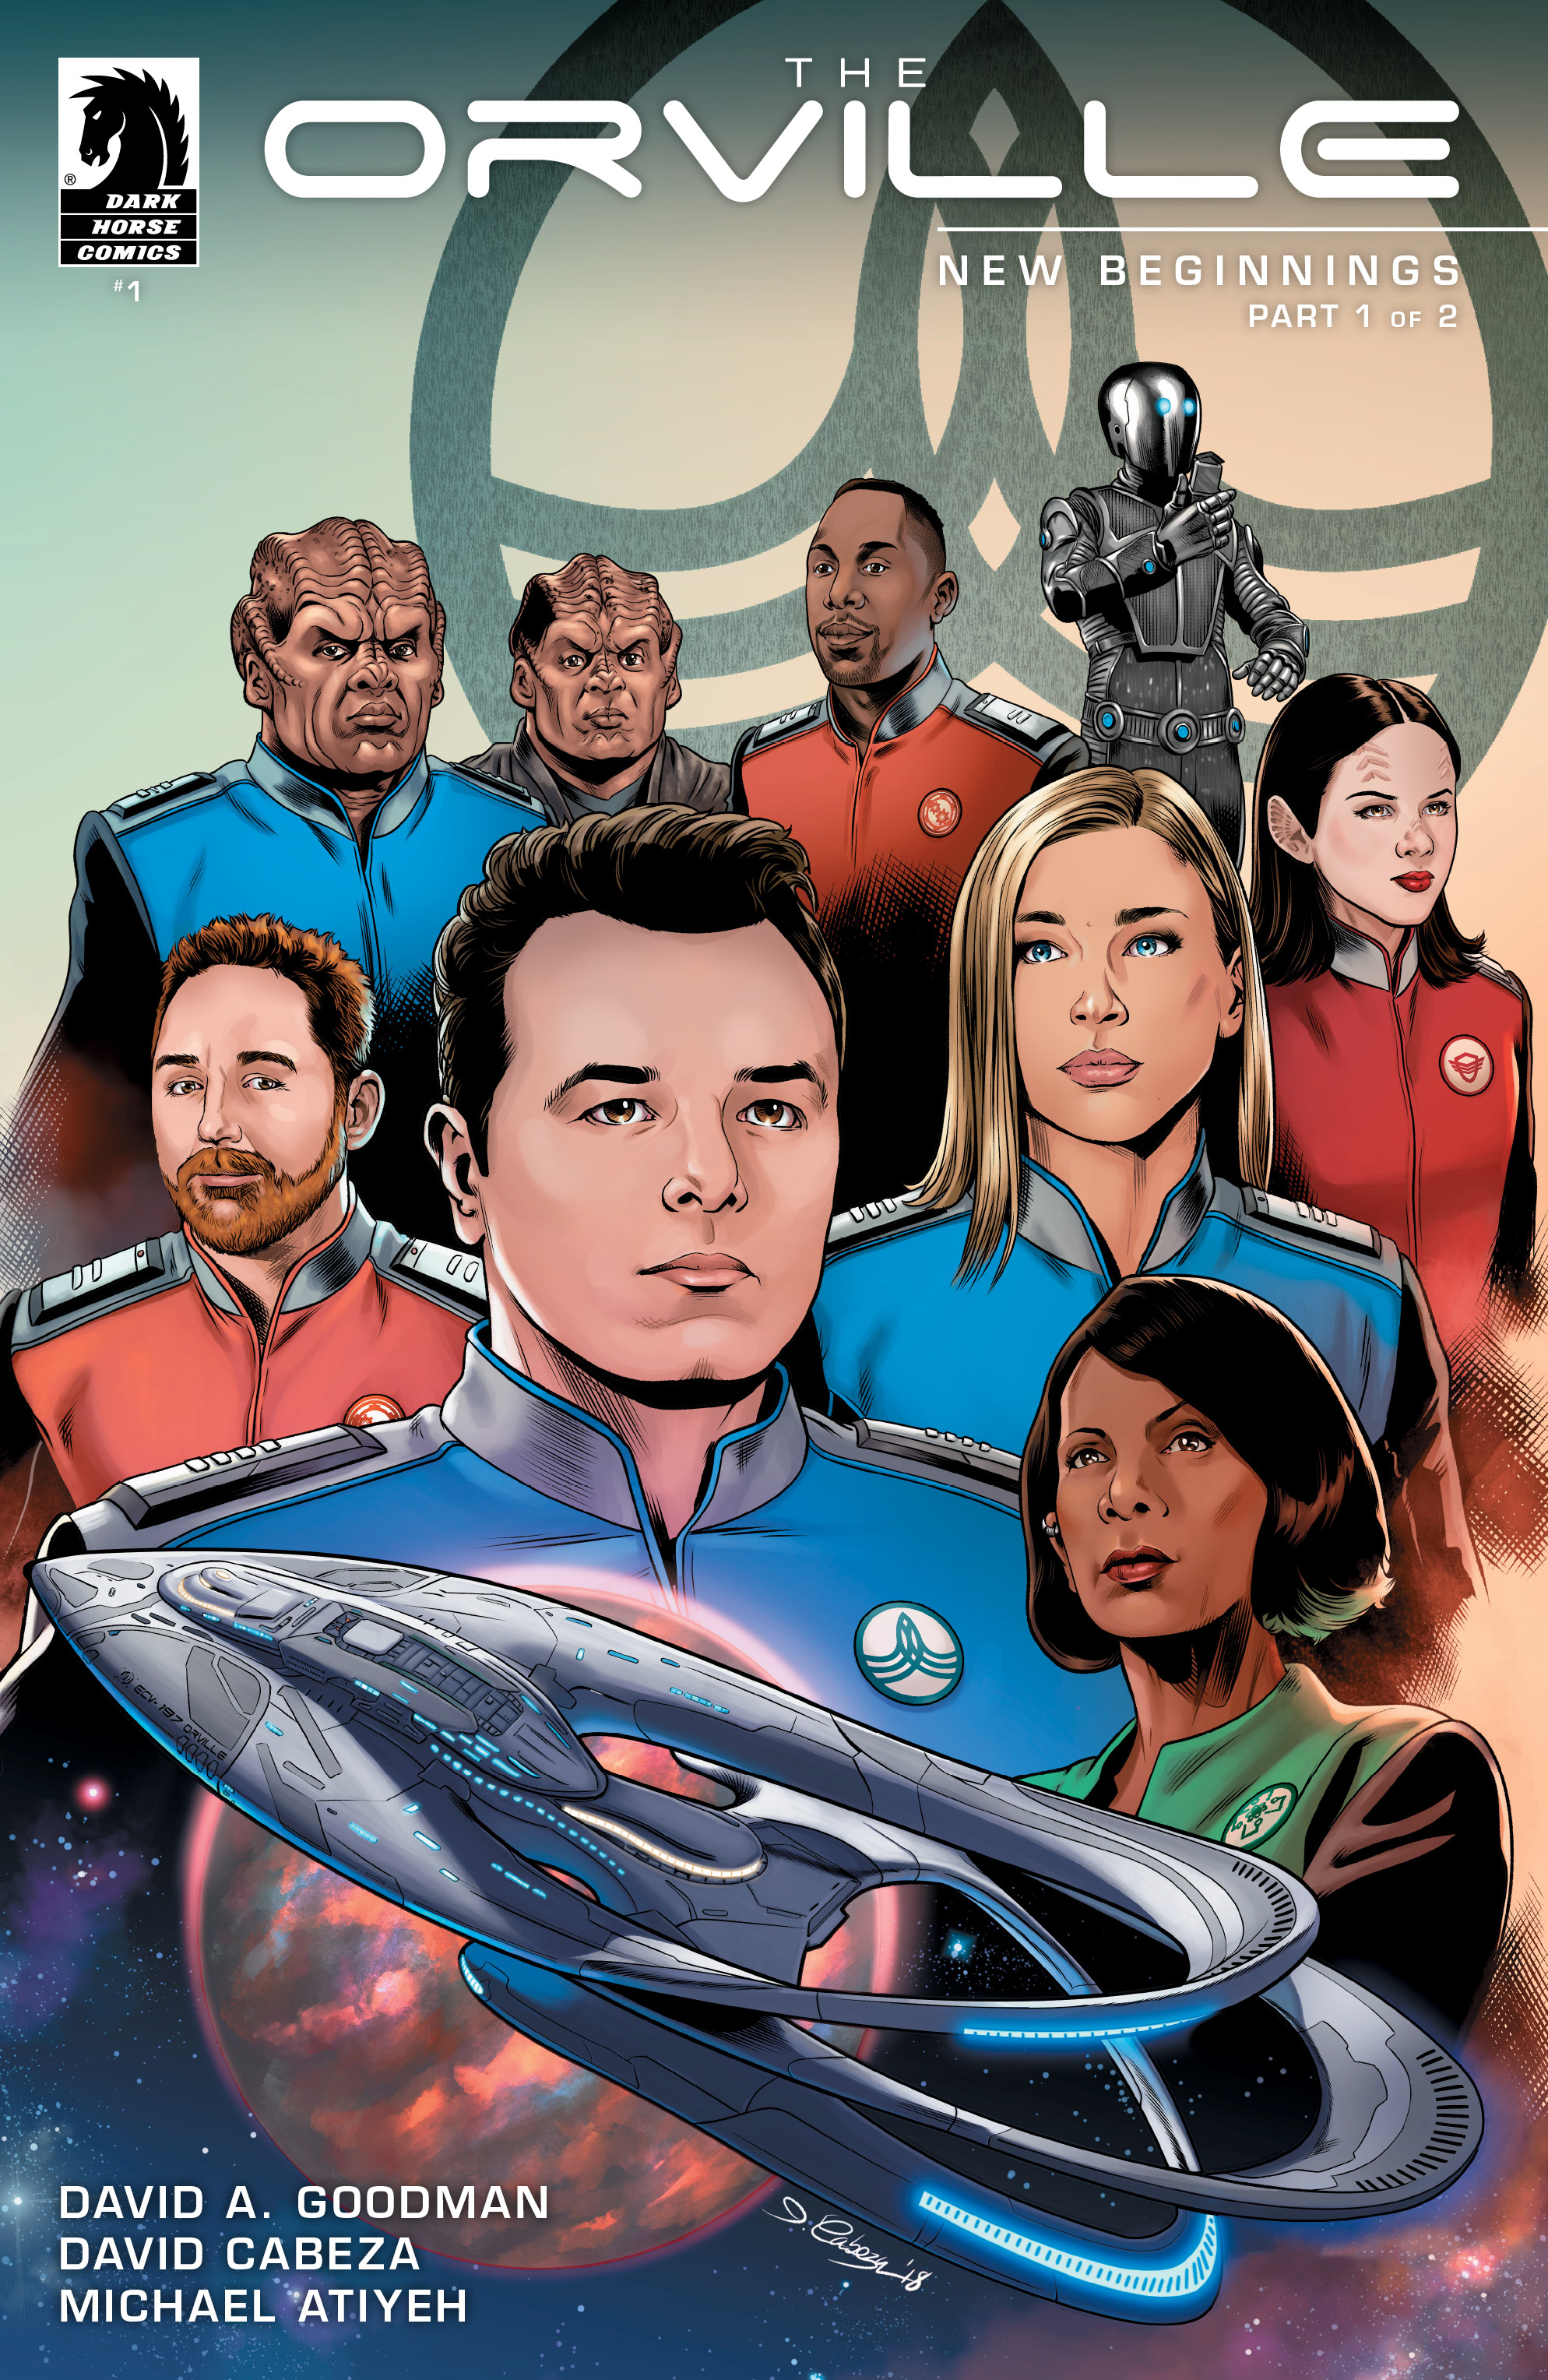 Read online The Orville comic -  Issue #1 - 1